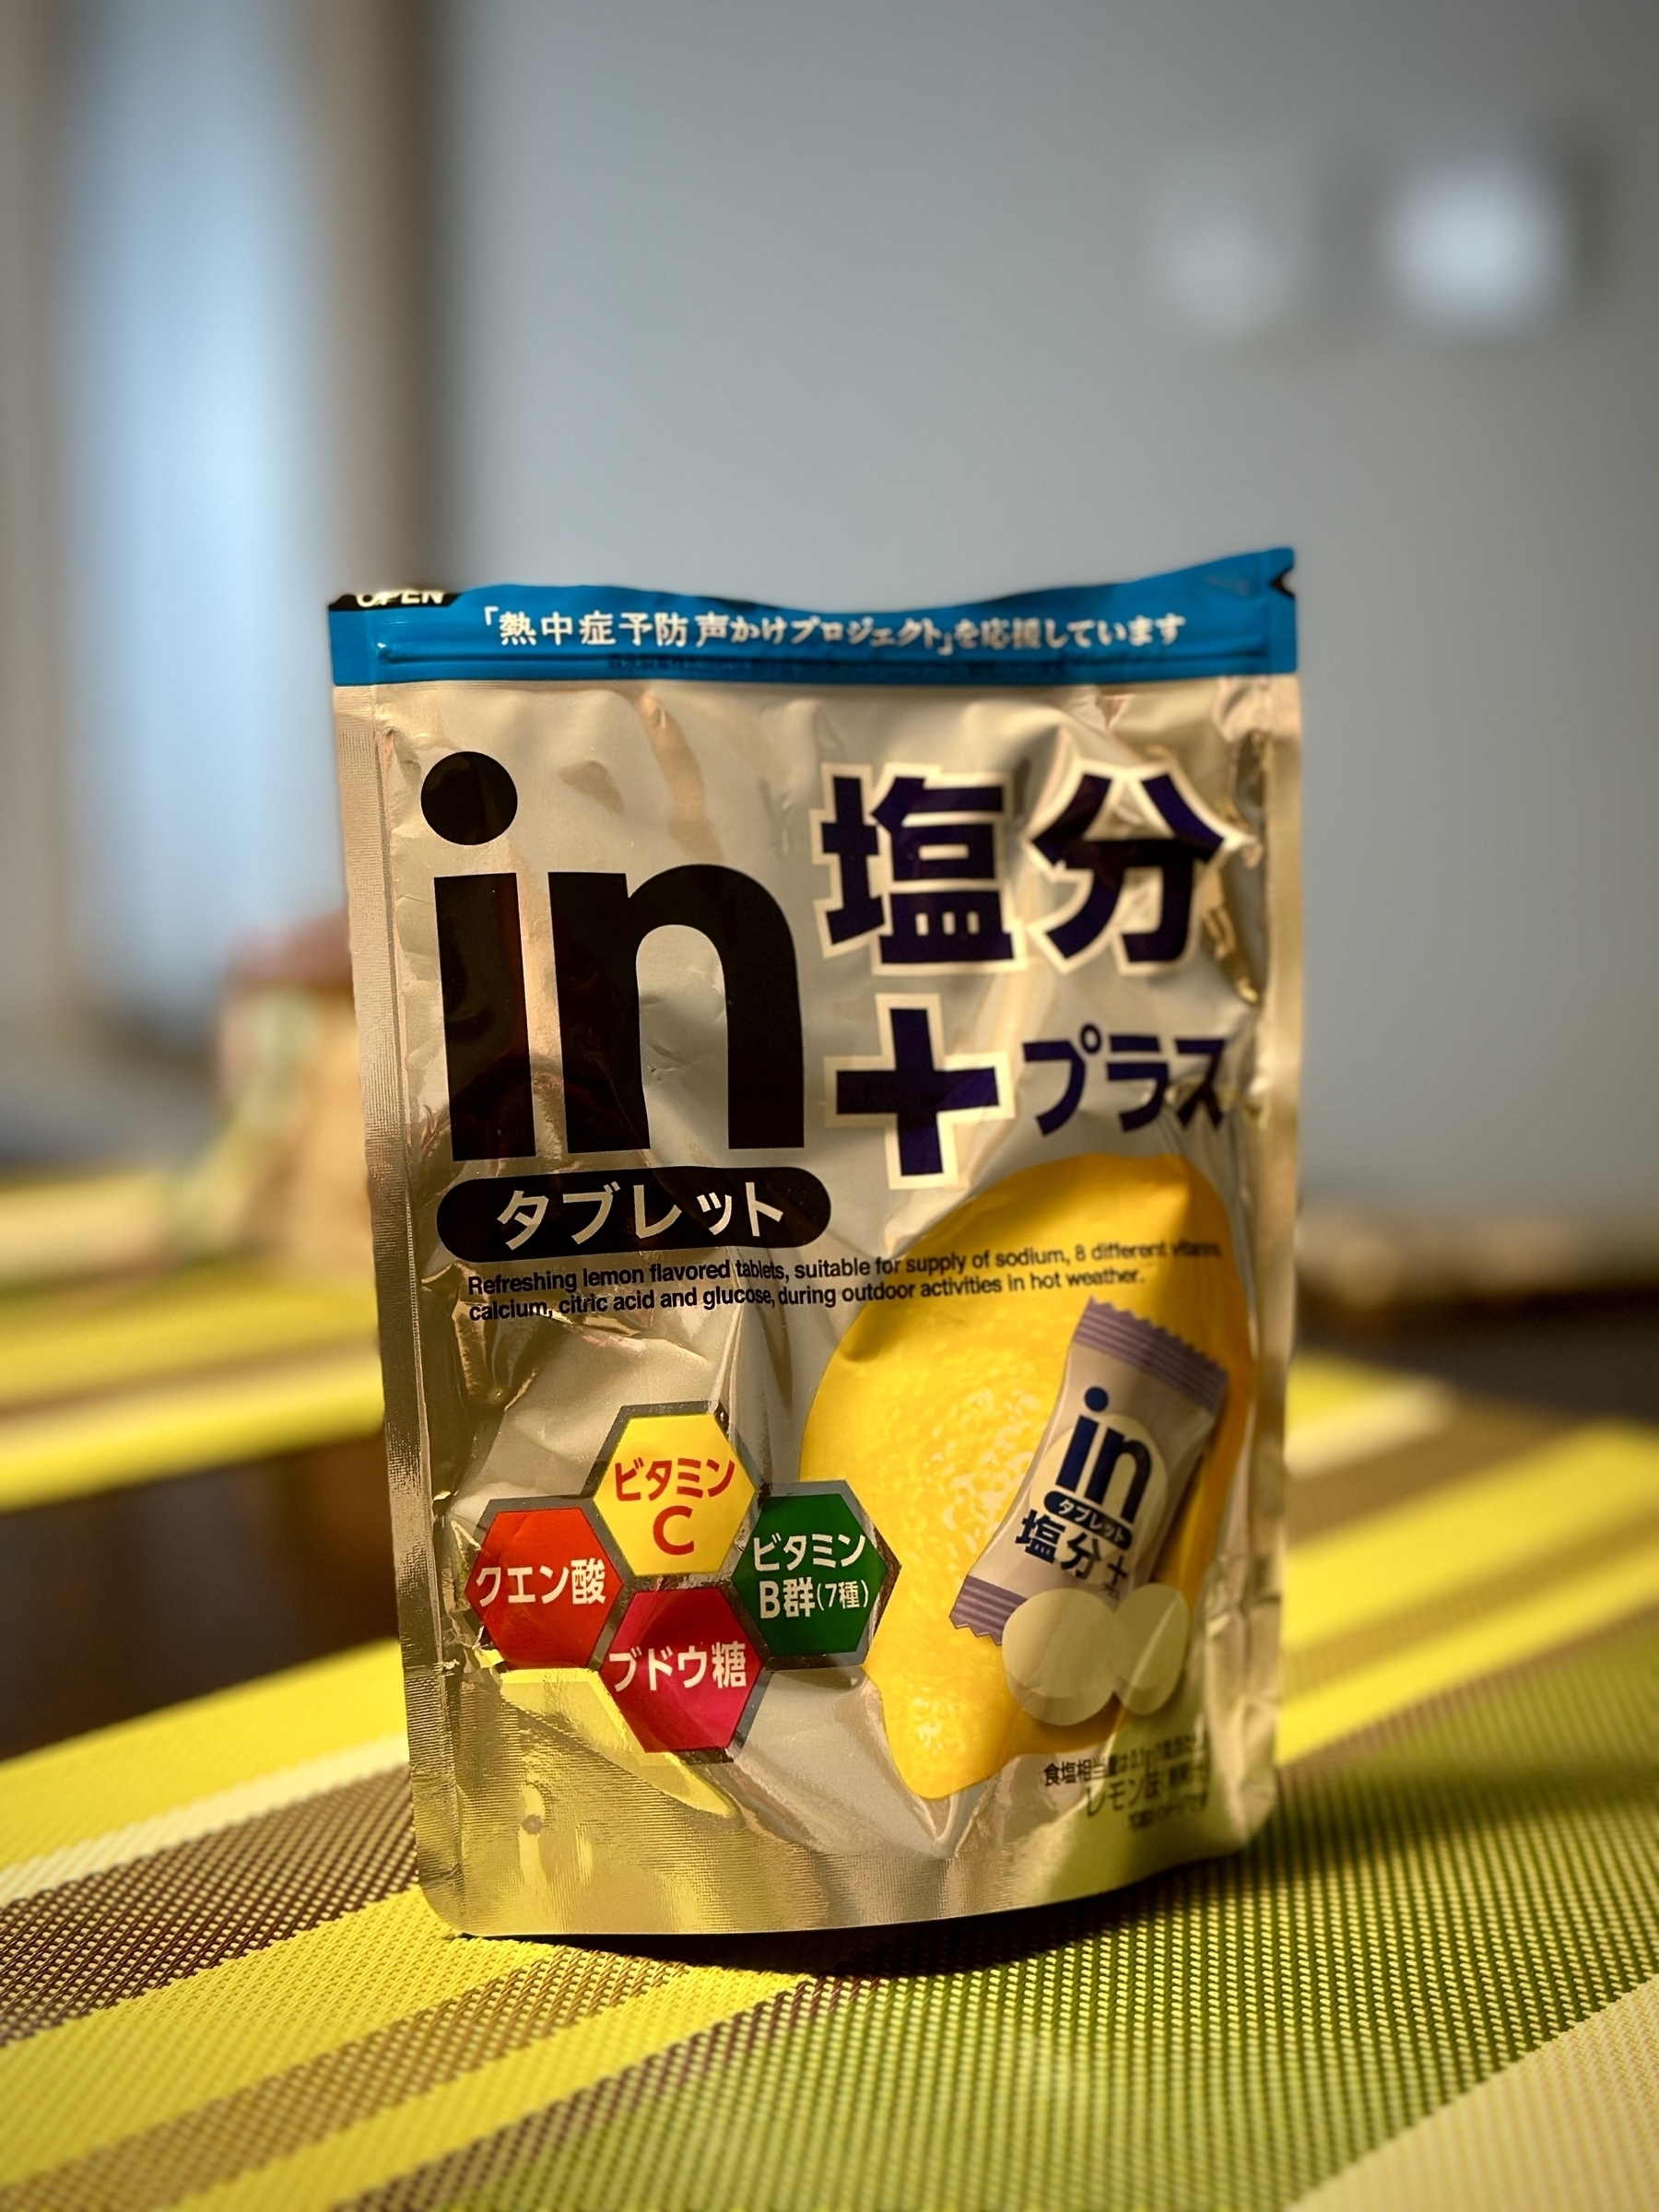 Photo of “in” salt candy tablets